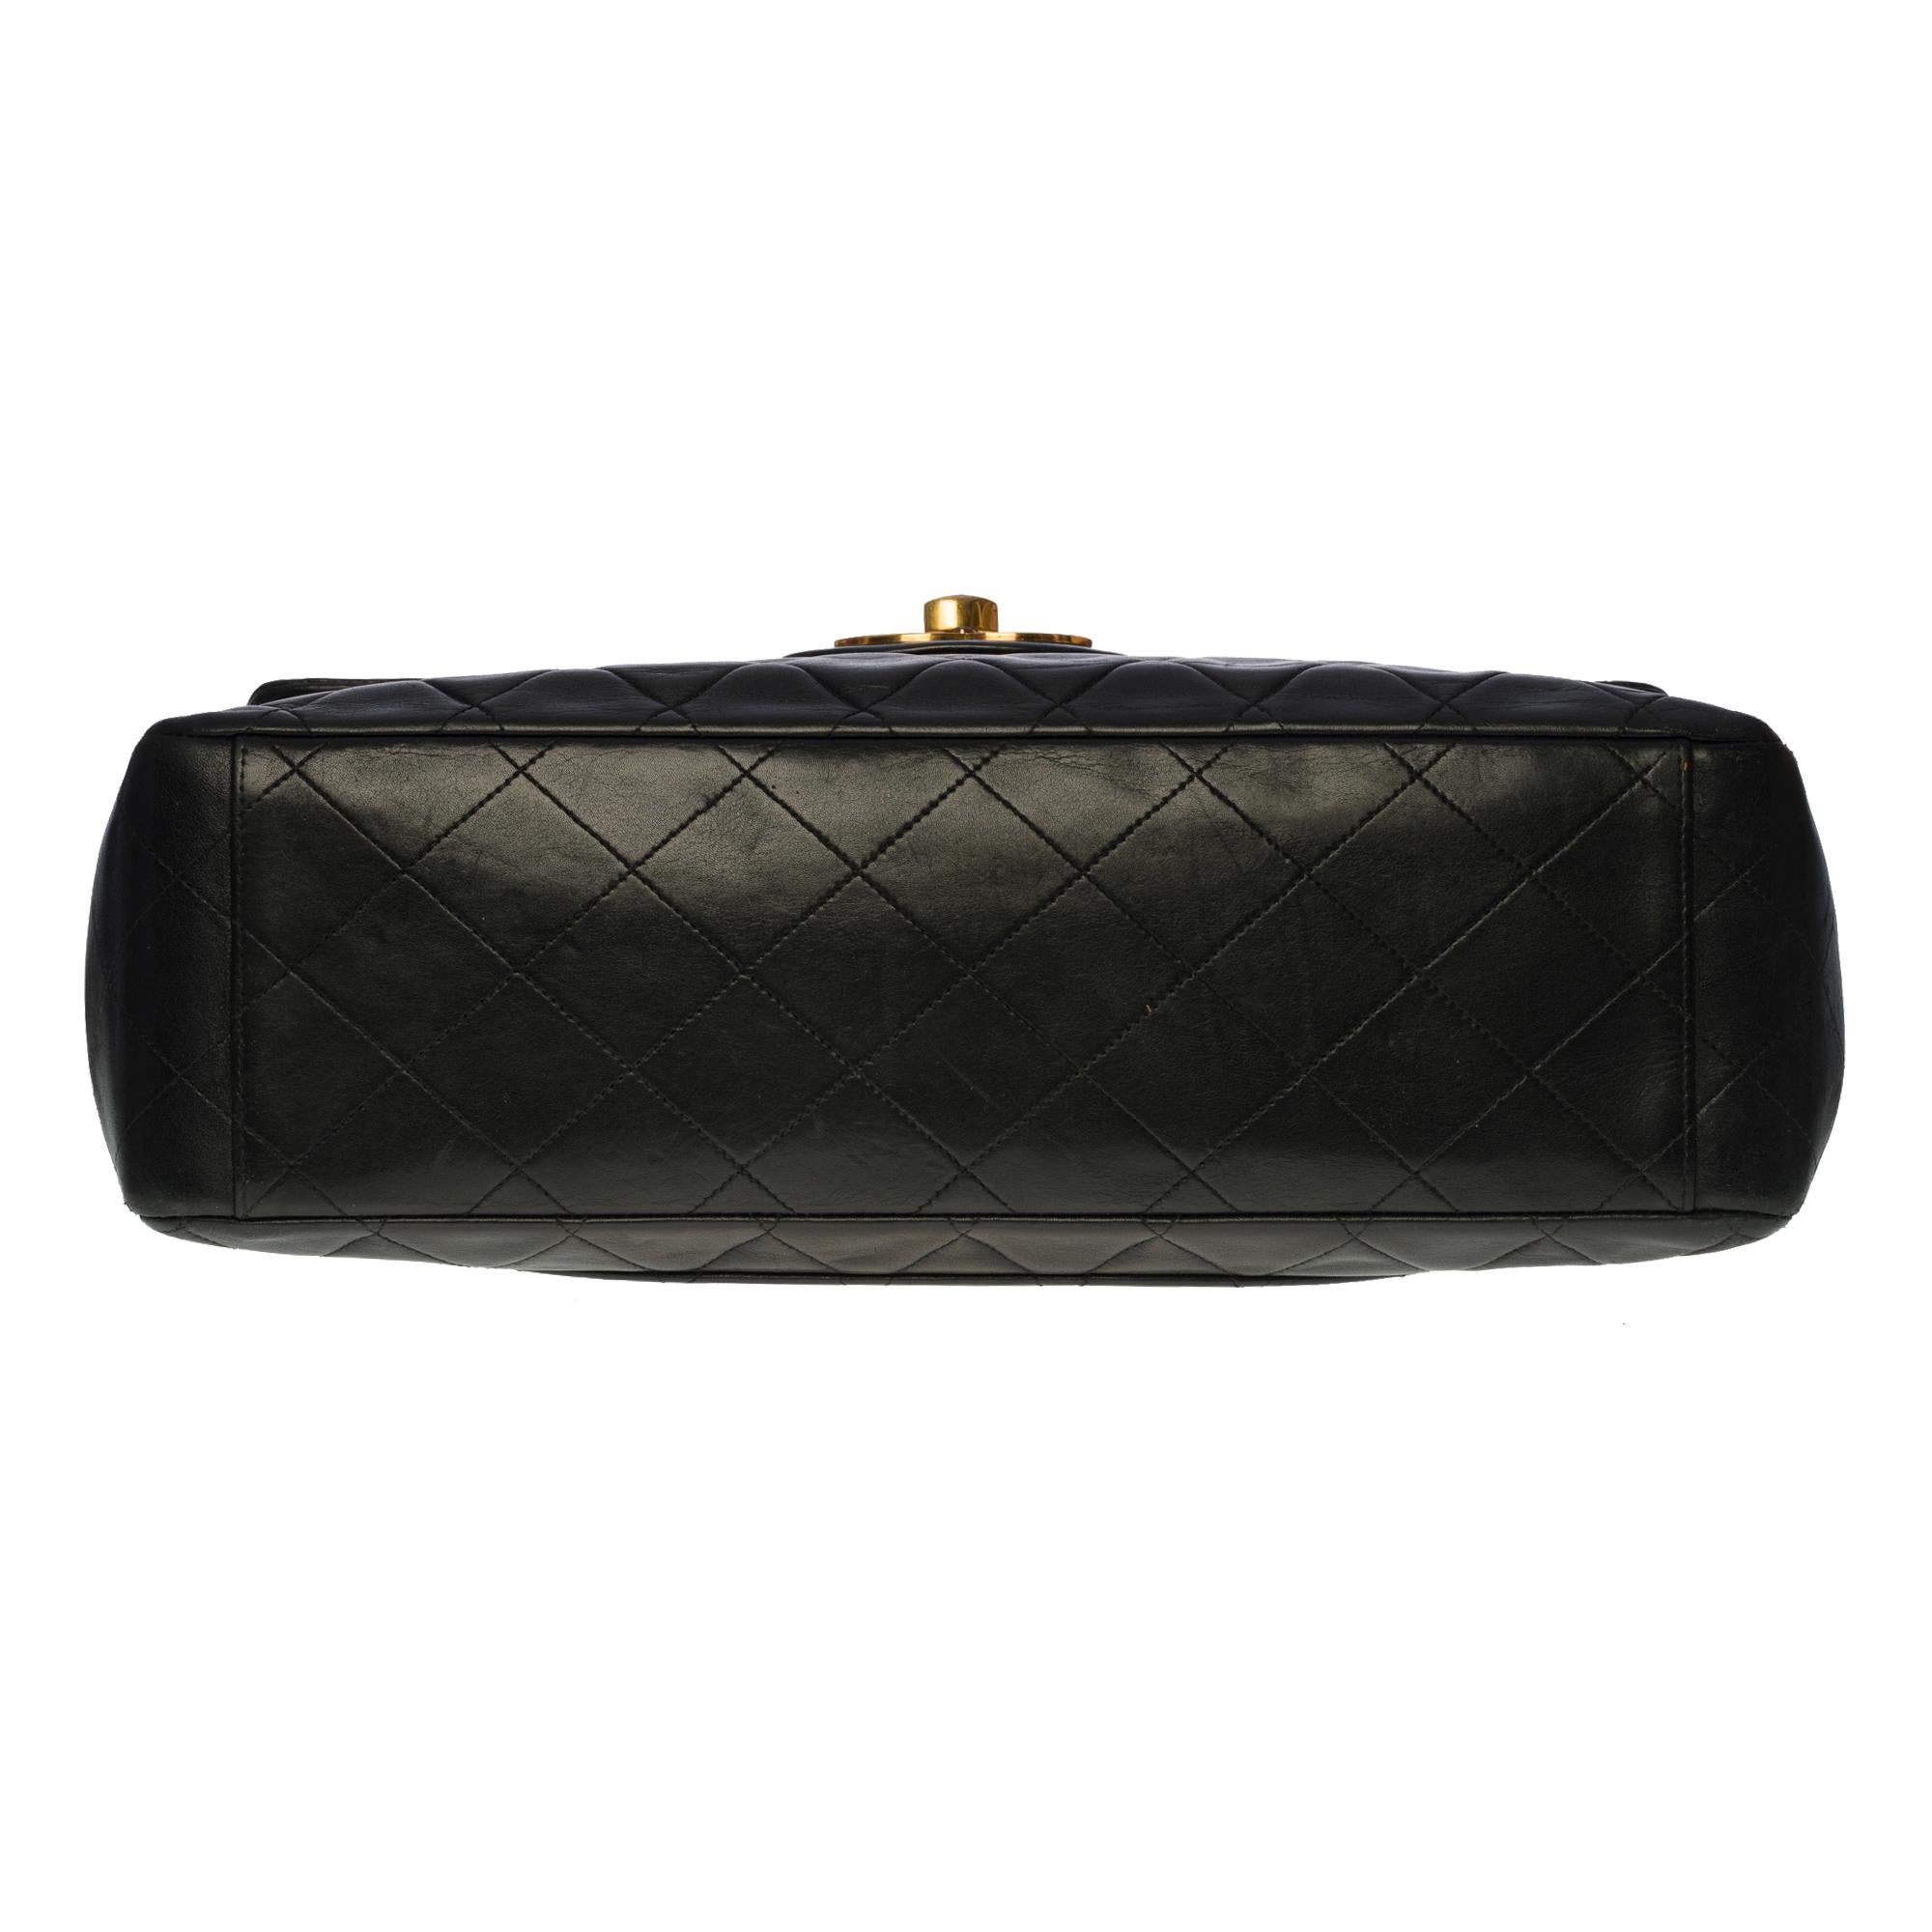 Chanel Timeless Maxi Jumbo flap shoulder bag in black quilted lambskin, GHW 4